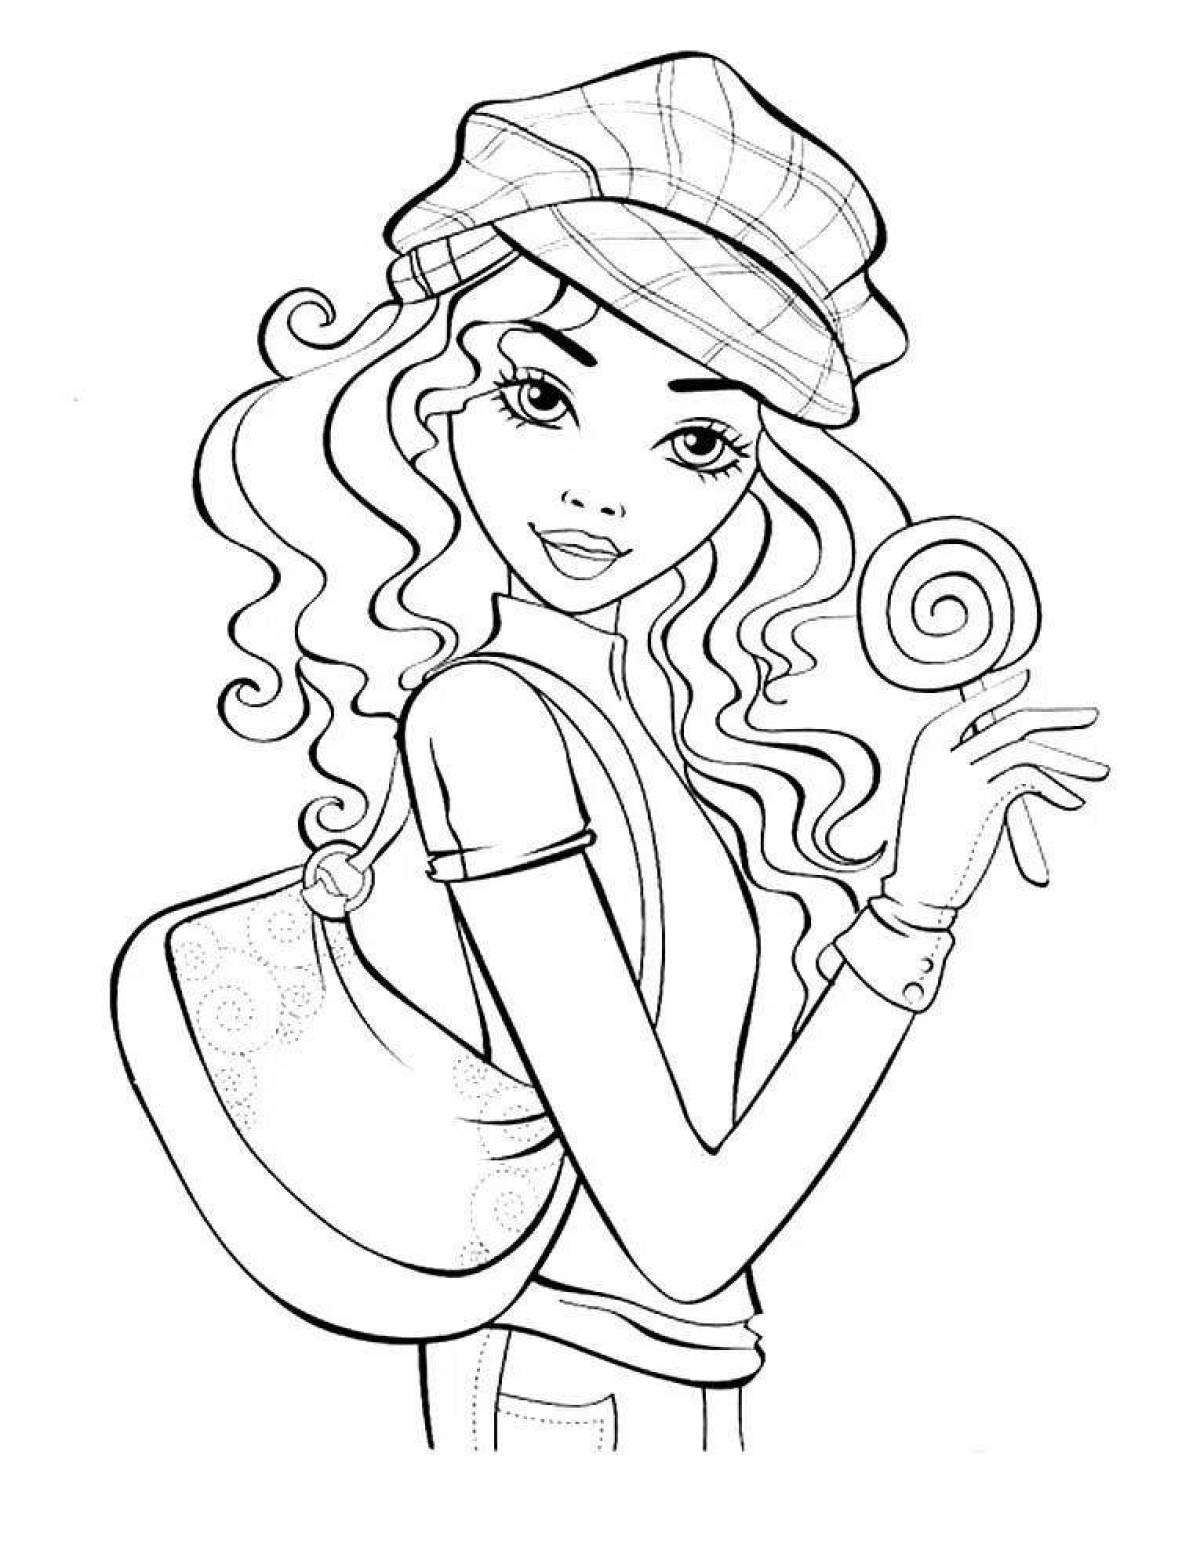 Beautifully detailed top model coloring page